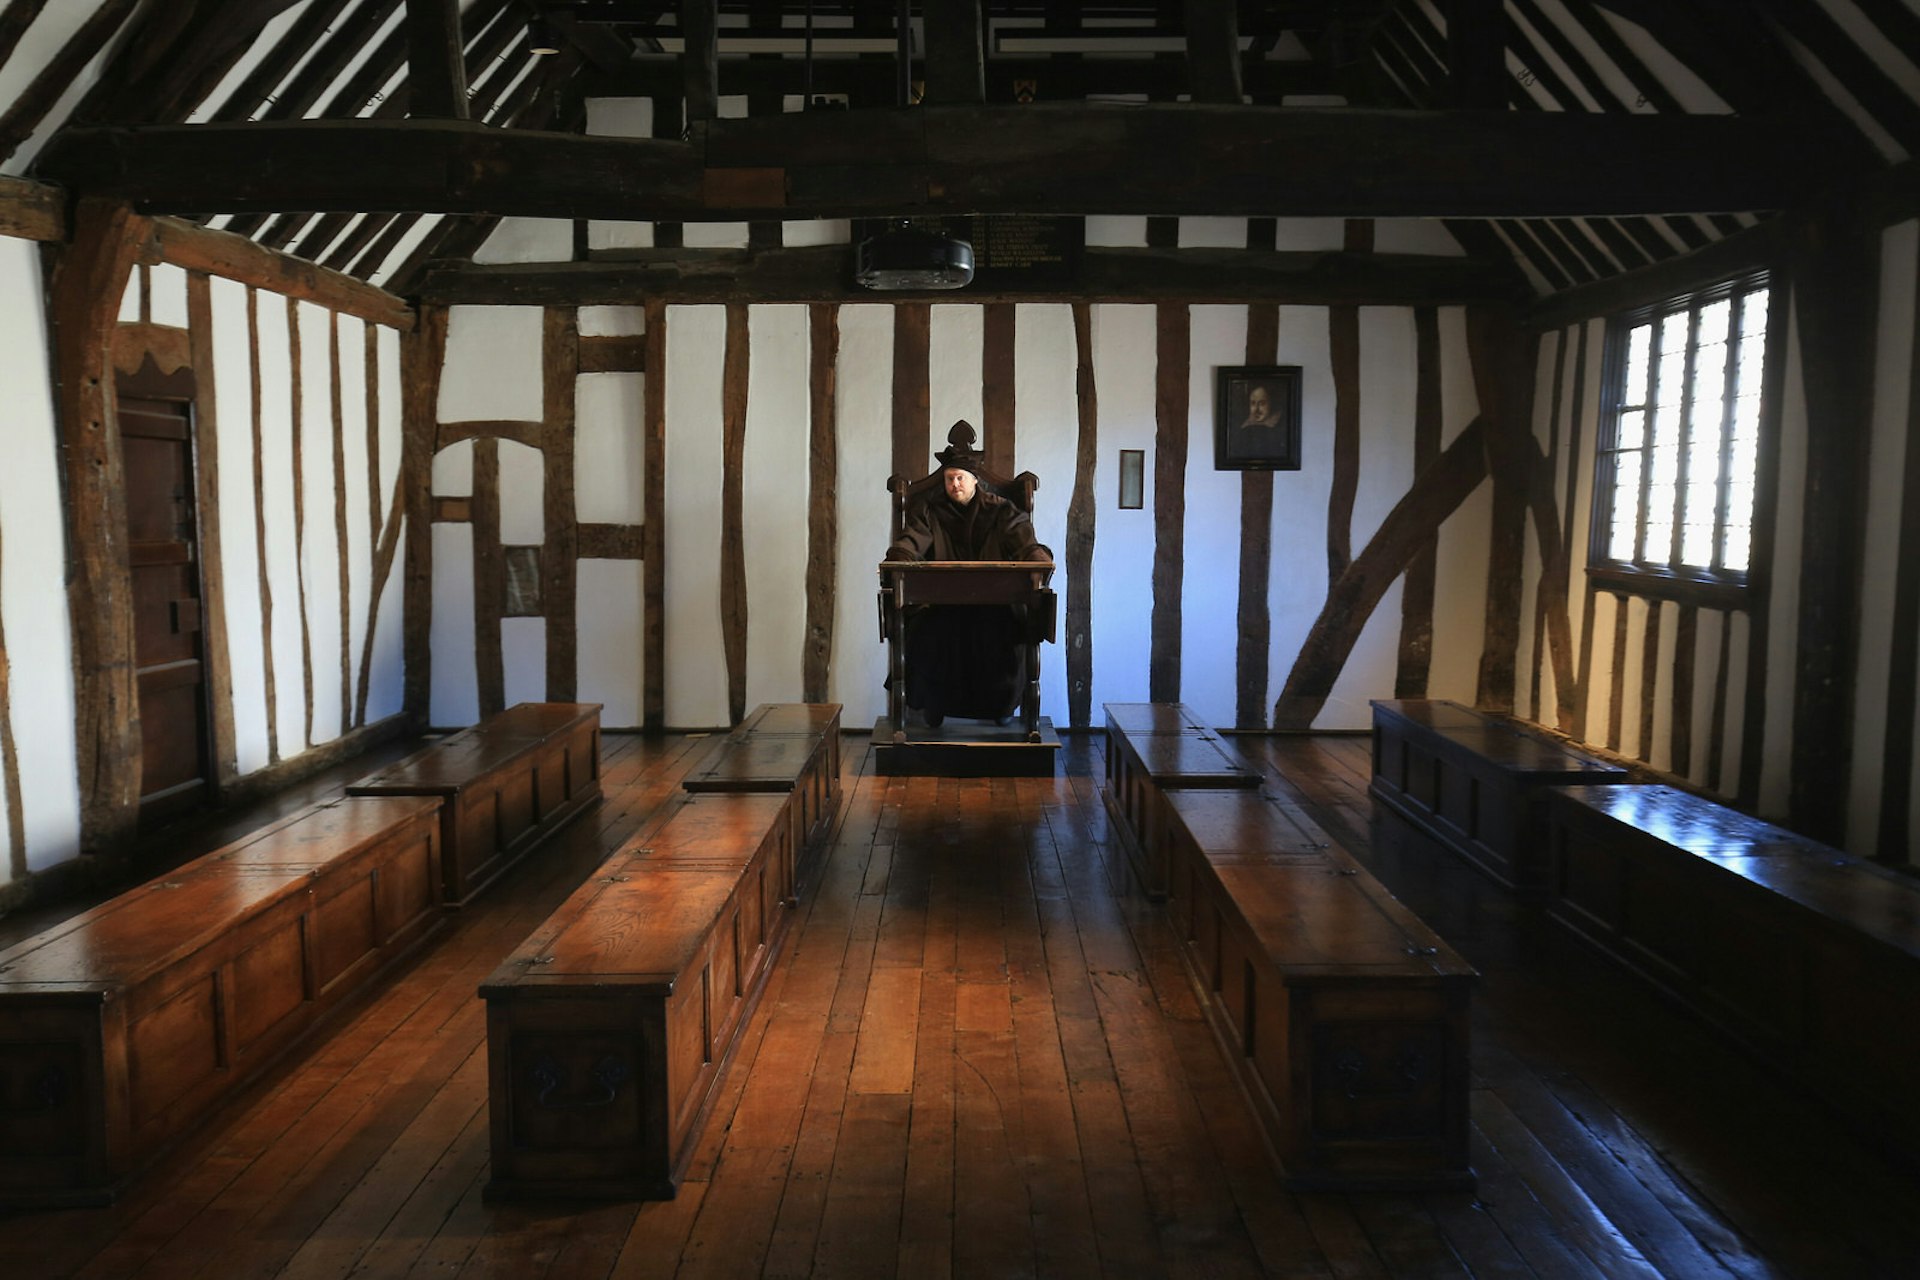 The room in which Shakespeare was taught is now open to the public © Christopher Furlong / Getty Images